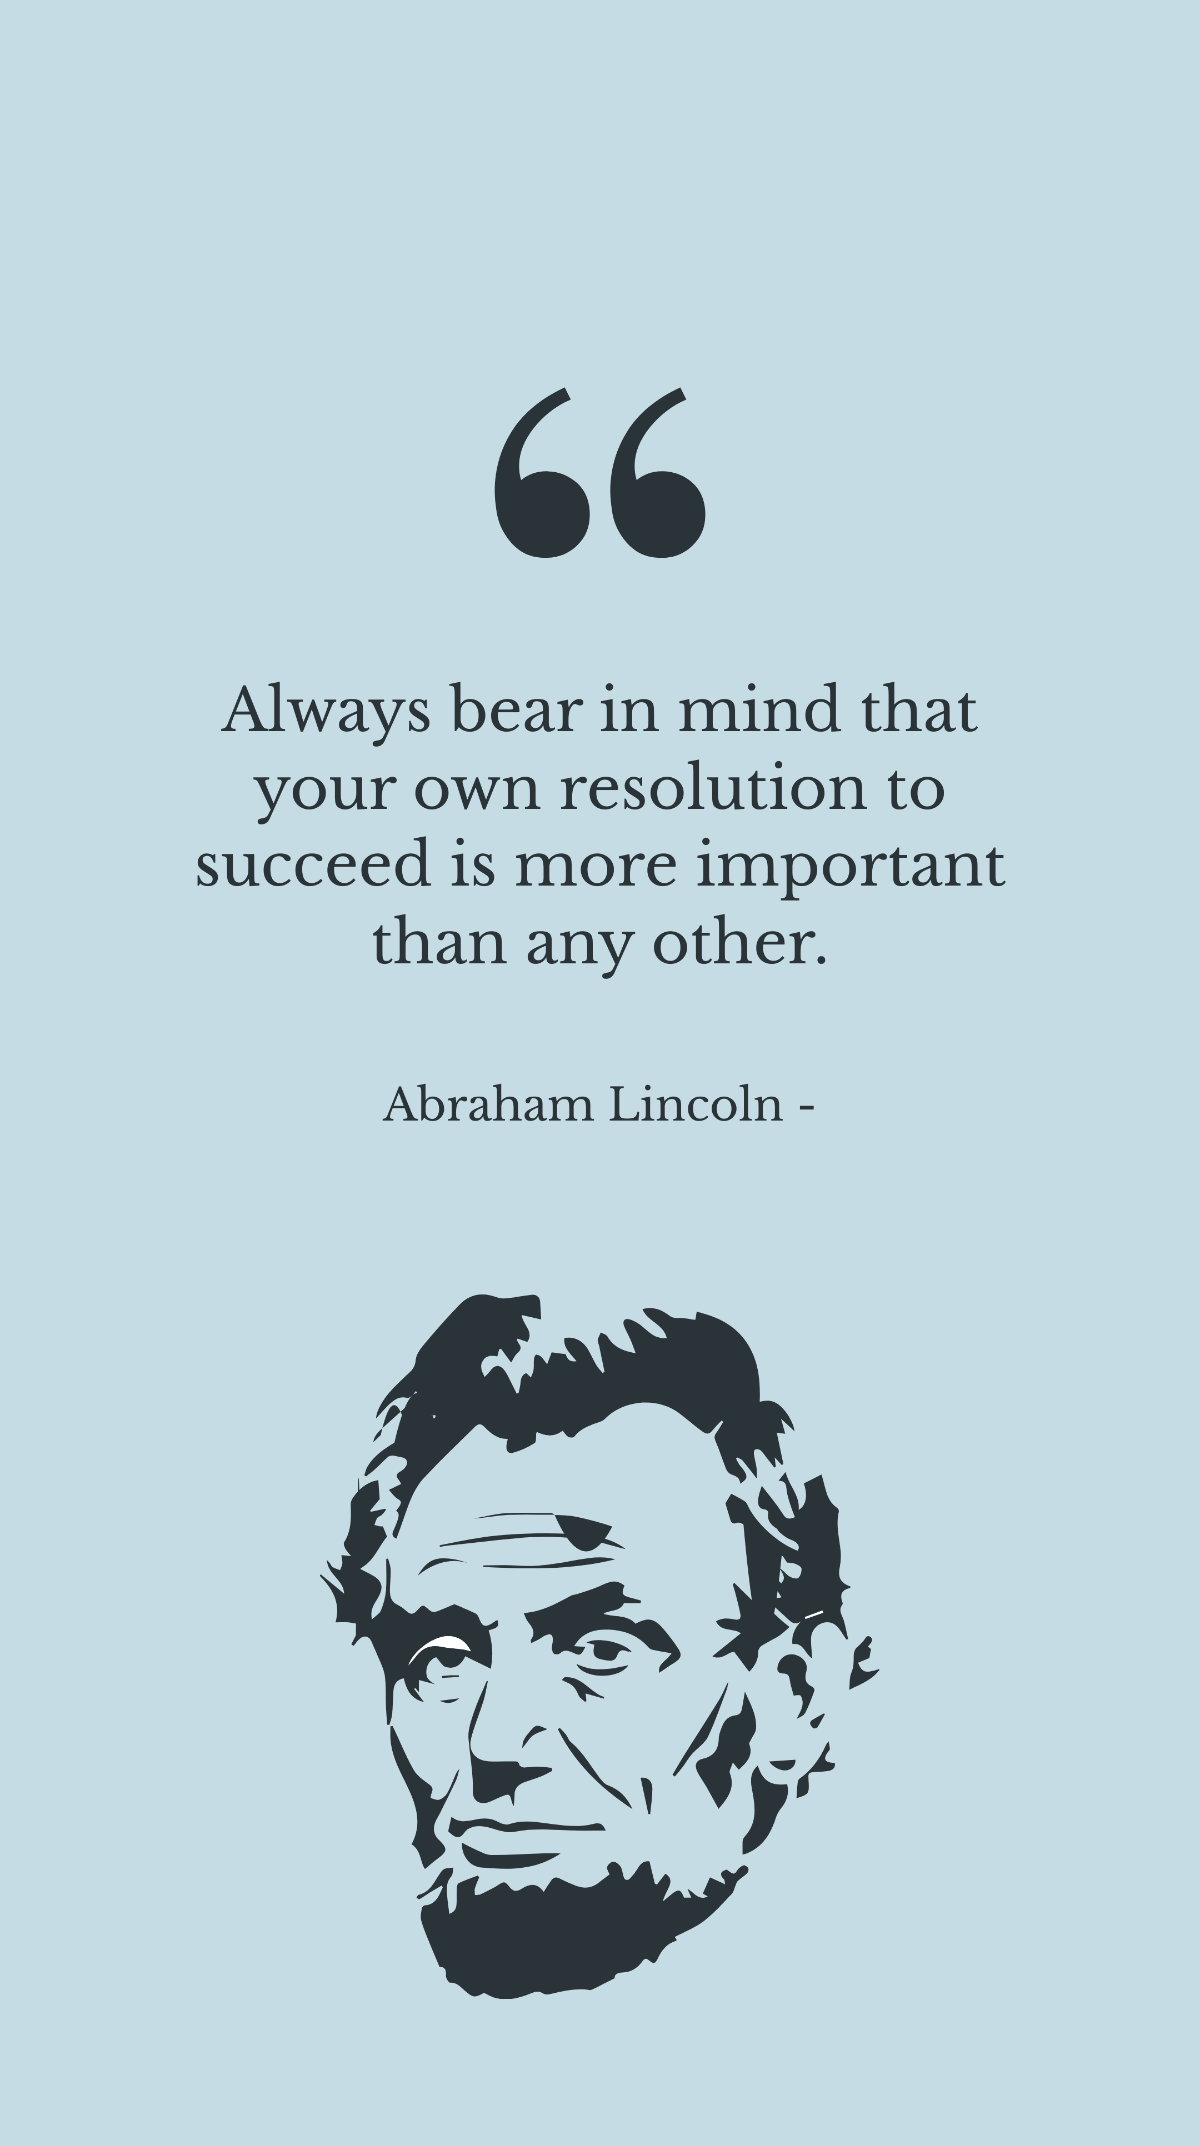 Abraham Lincoln - Always bear in mind that your own resolution to succeed is more important than any other. Template